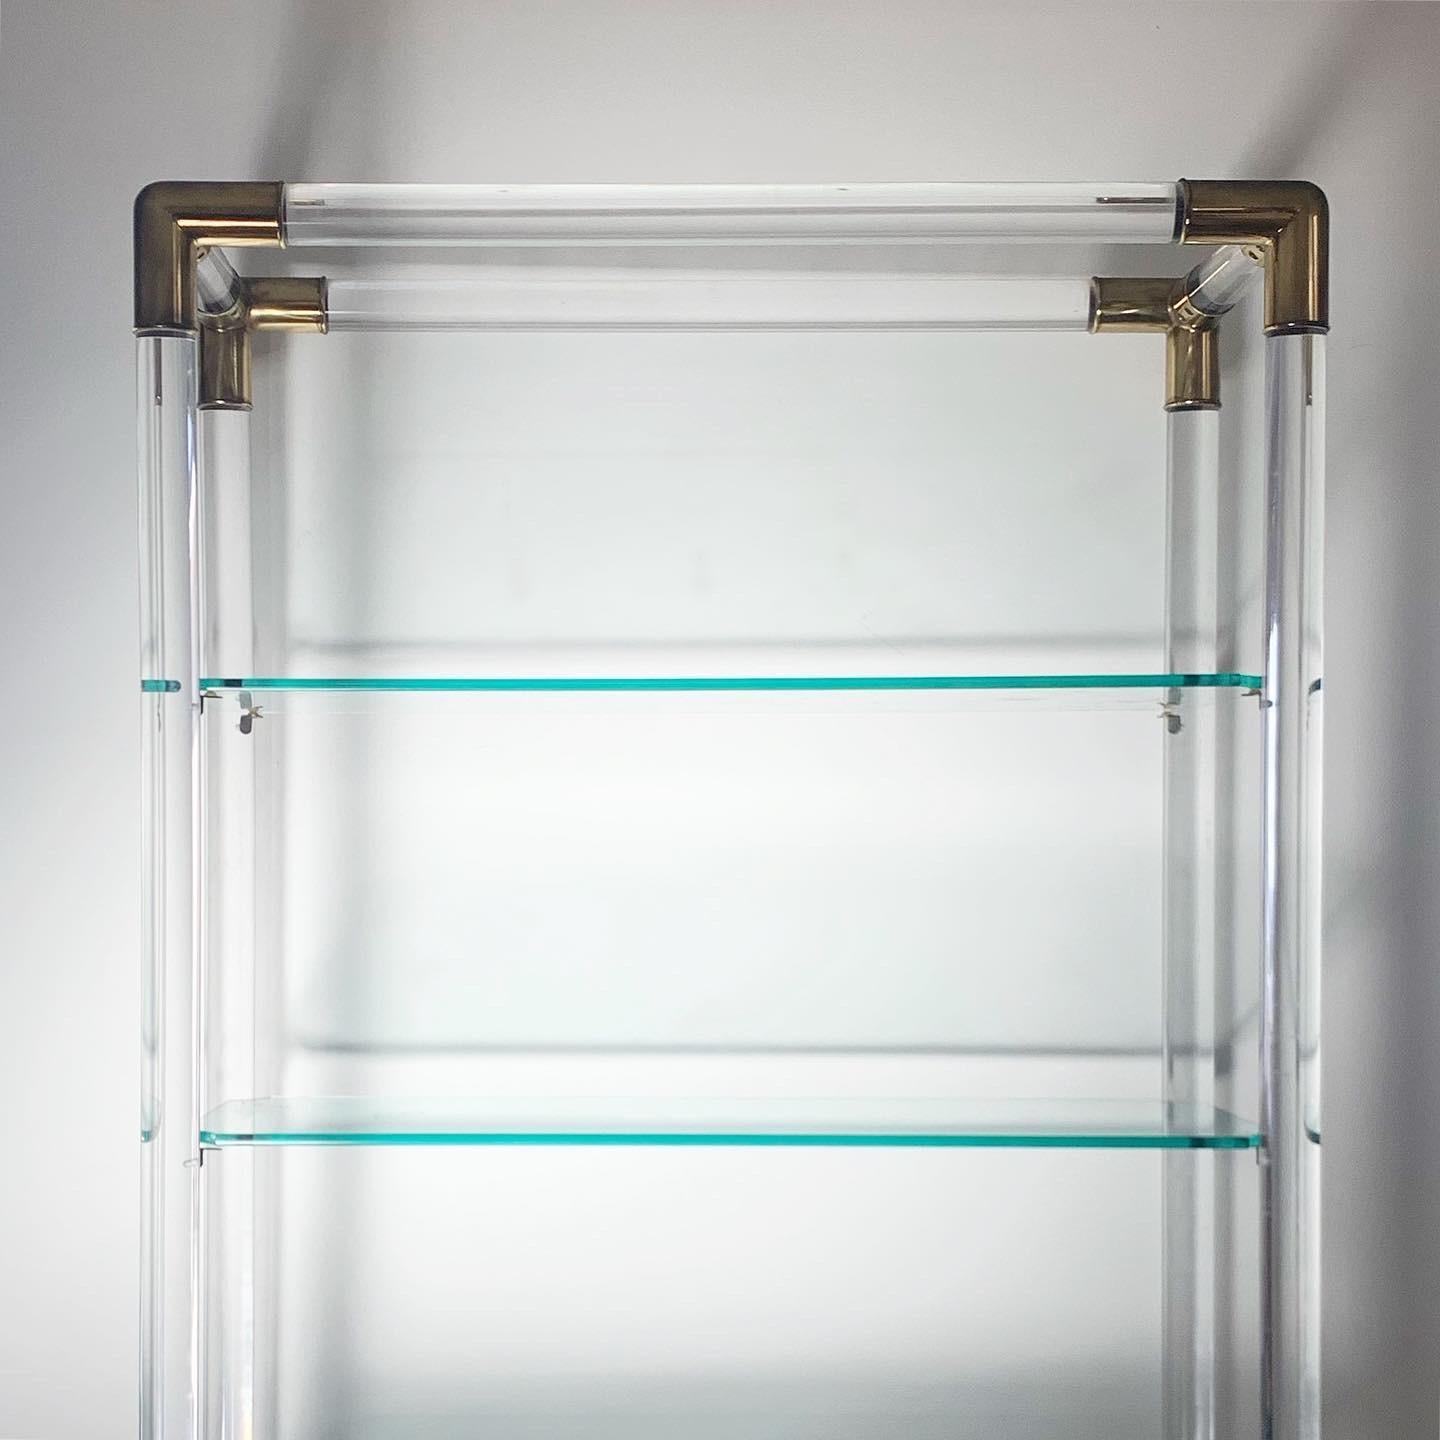 Charles Hollis Jones style lucite and brass mid century bookshelf / étagère with glass shelves. Circa mid 1960s. Wear consistent with age and use, but overall great condition. Shelves are removable for storage and transport. Quite heavy. 